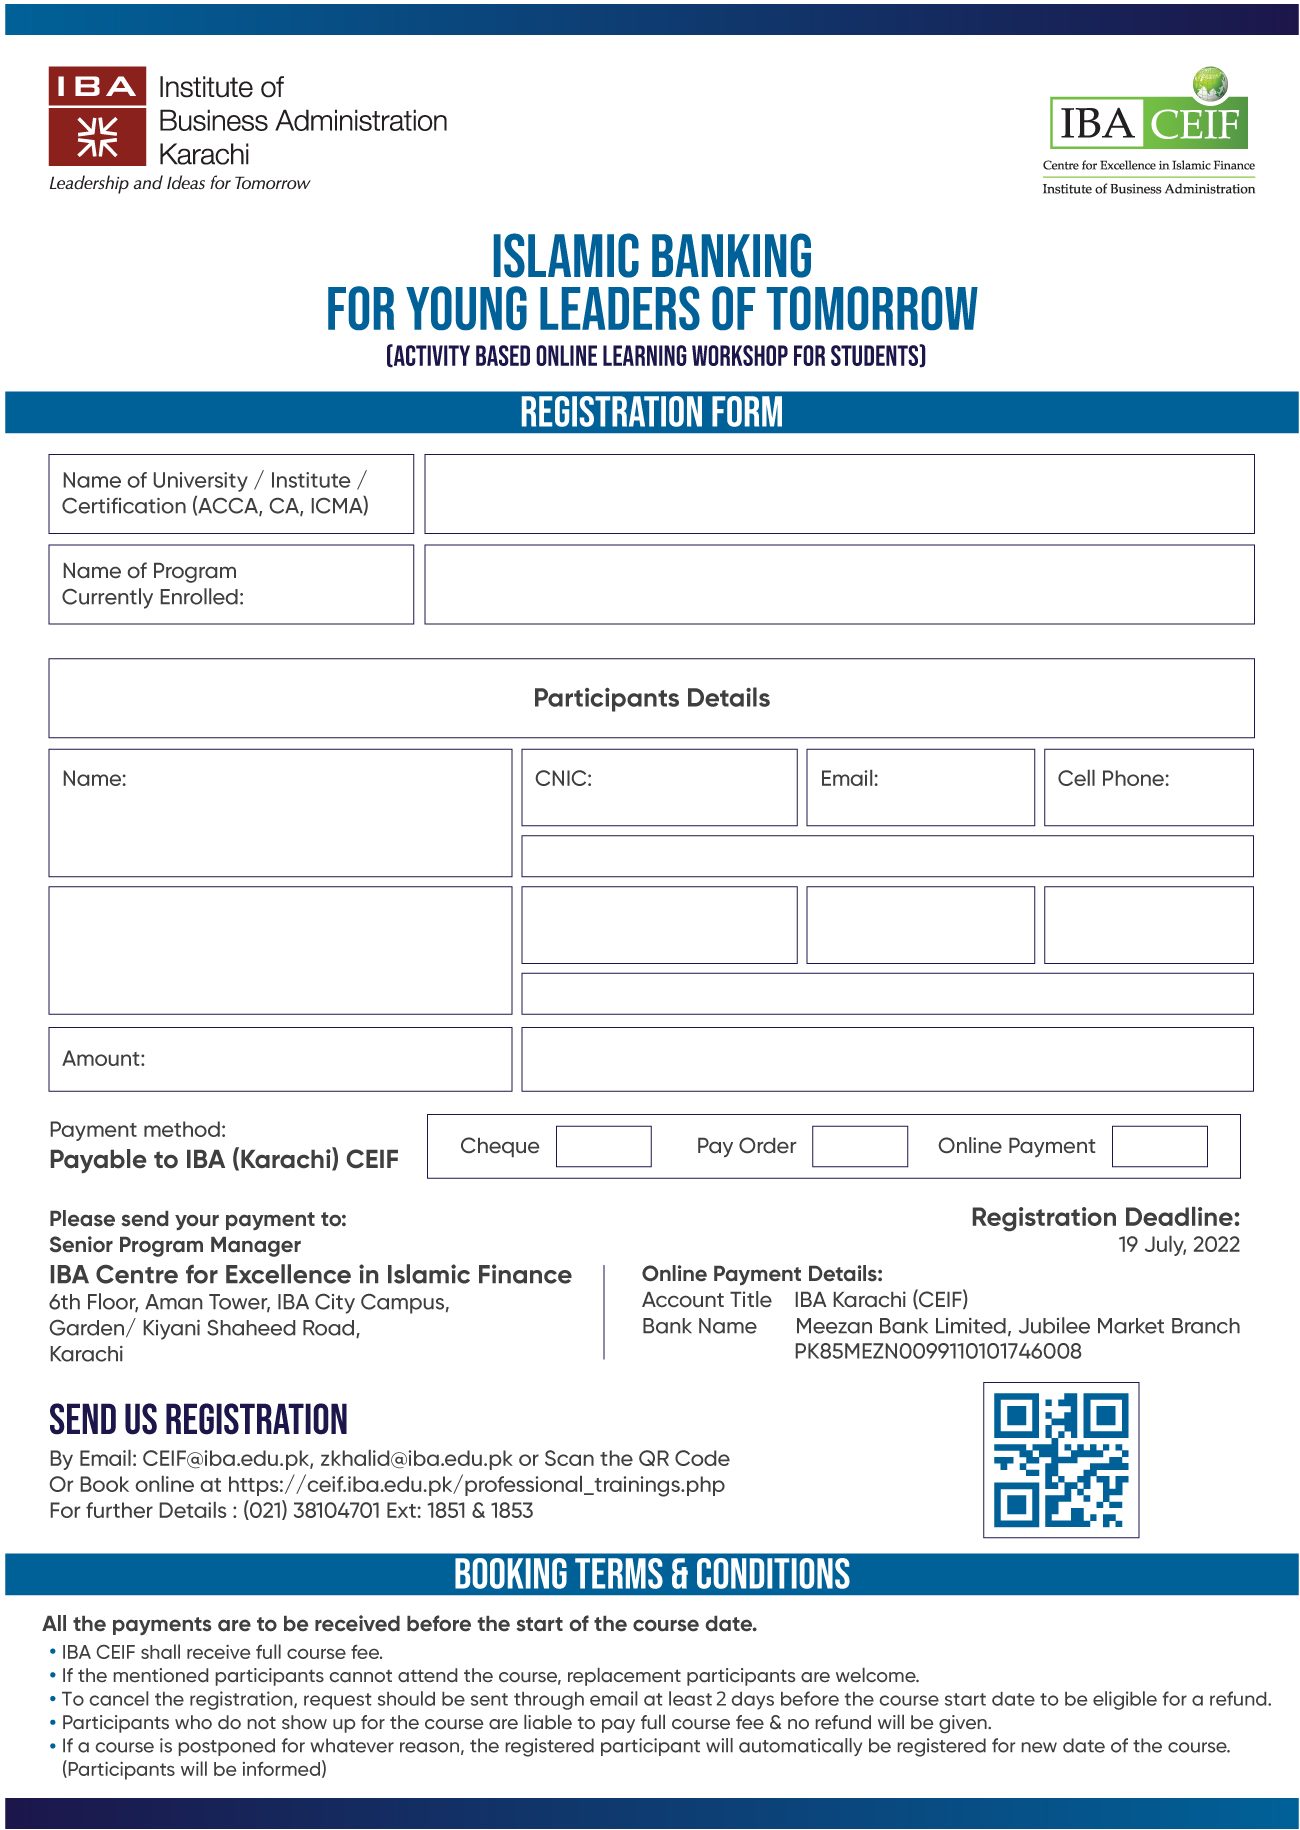 Islamic Banking for Young Leaders for Tomorrow